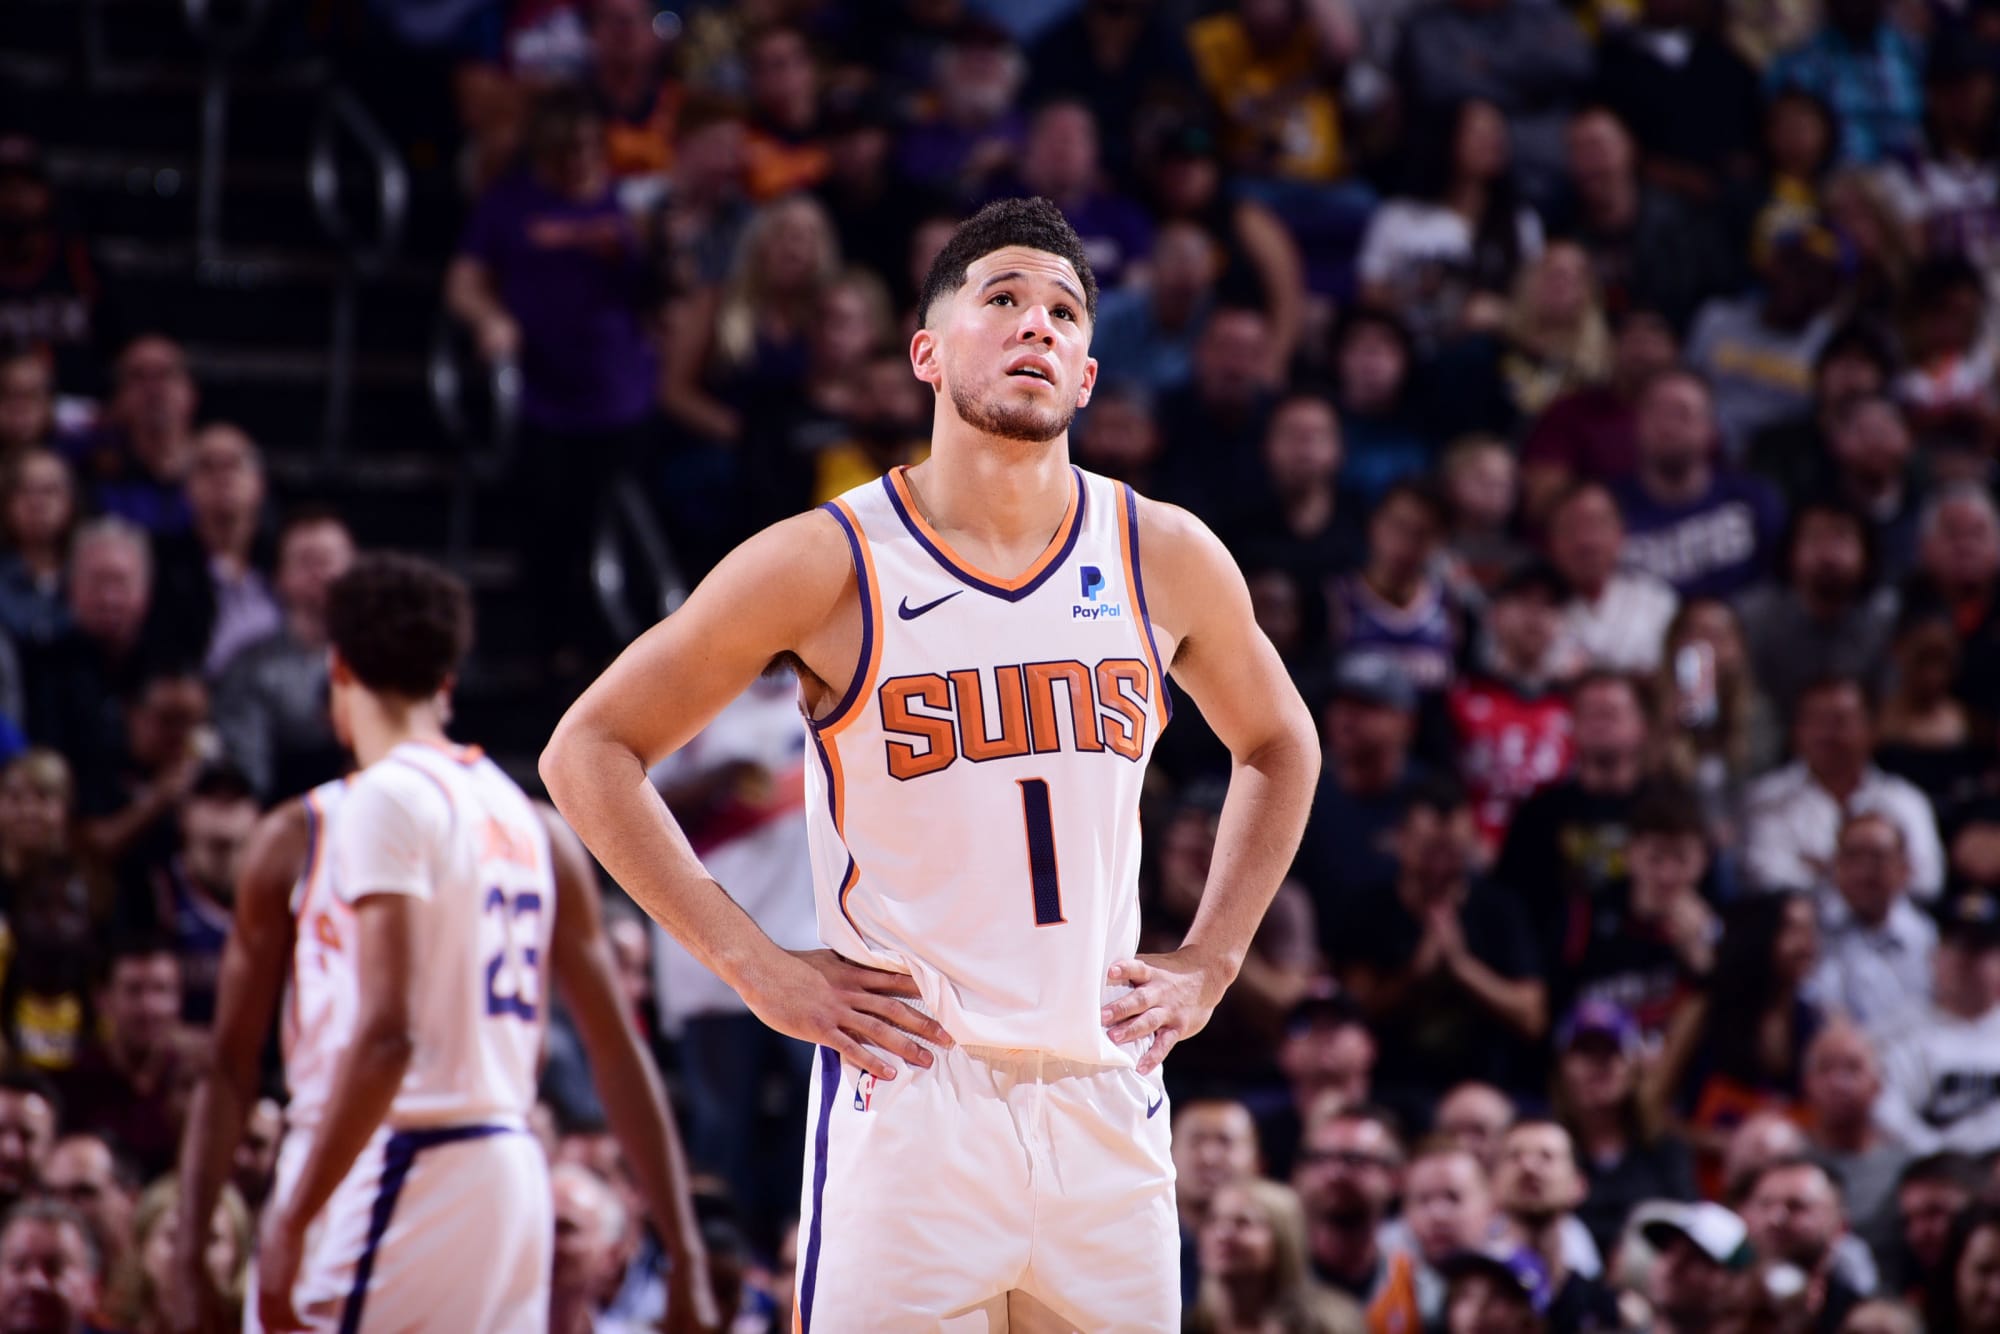 The Phoenix Suns are favored to win over the best team in the East